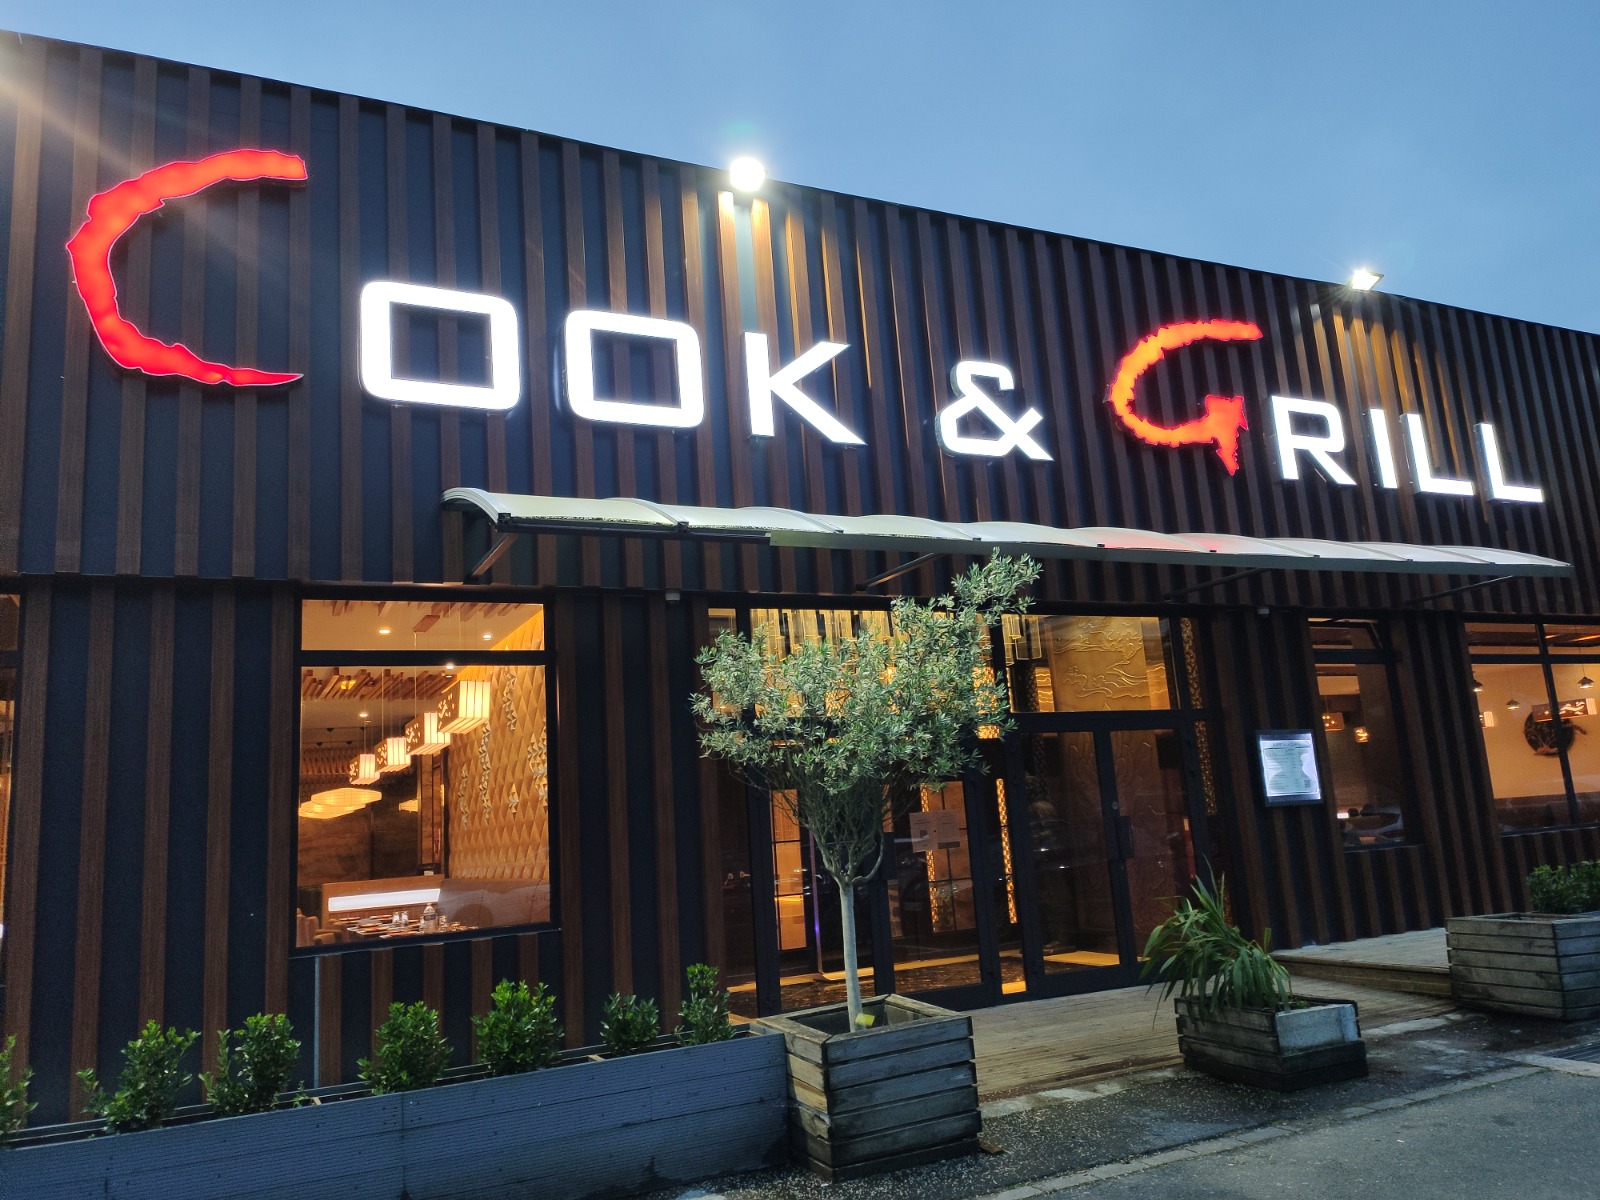 Home | Restaurant COOK AND GRILL